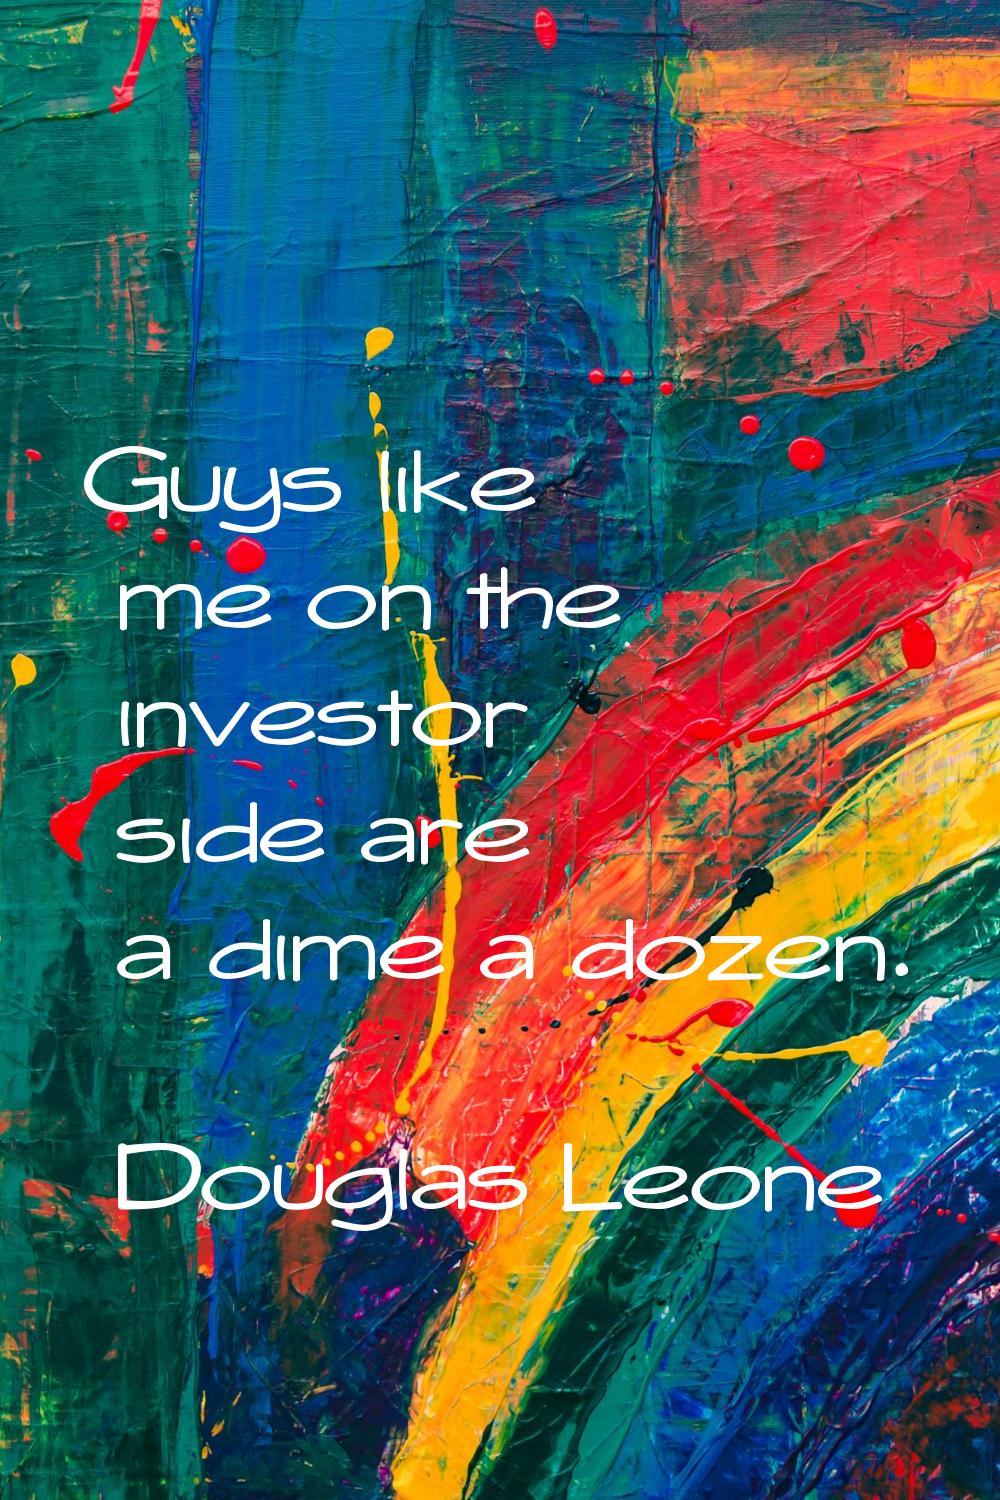 Guys like me on the investor side are a dime a dozen.